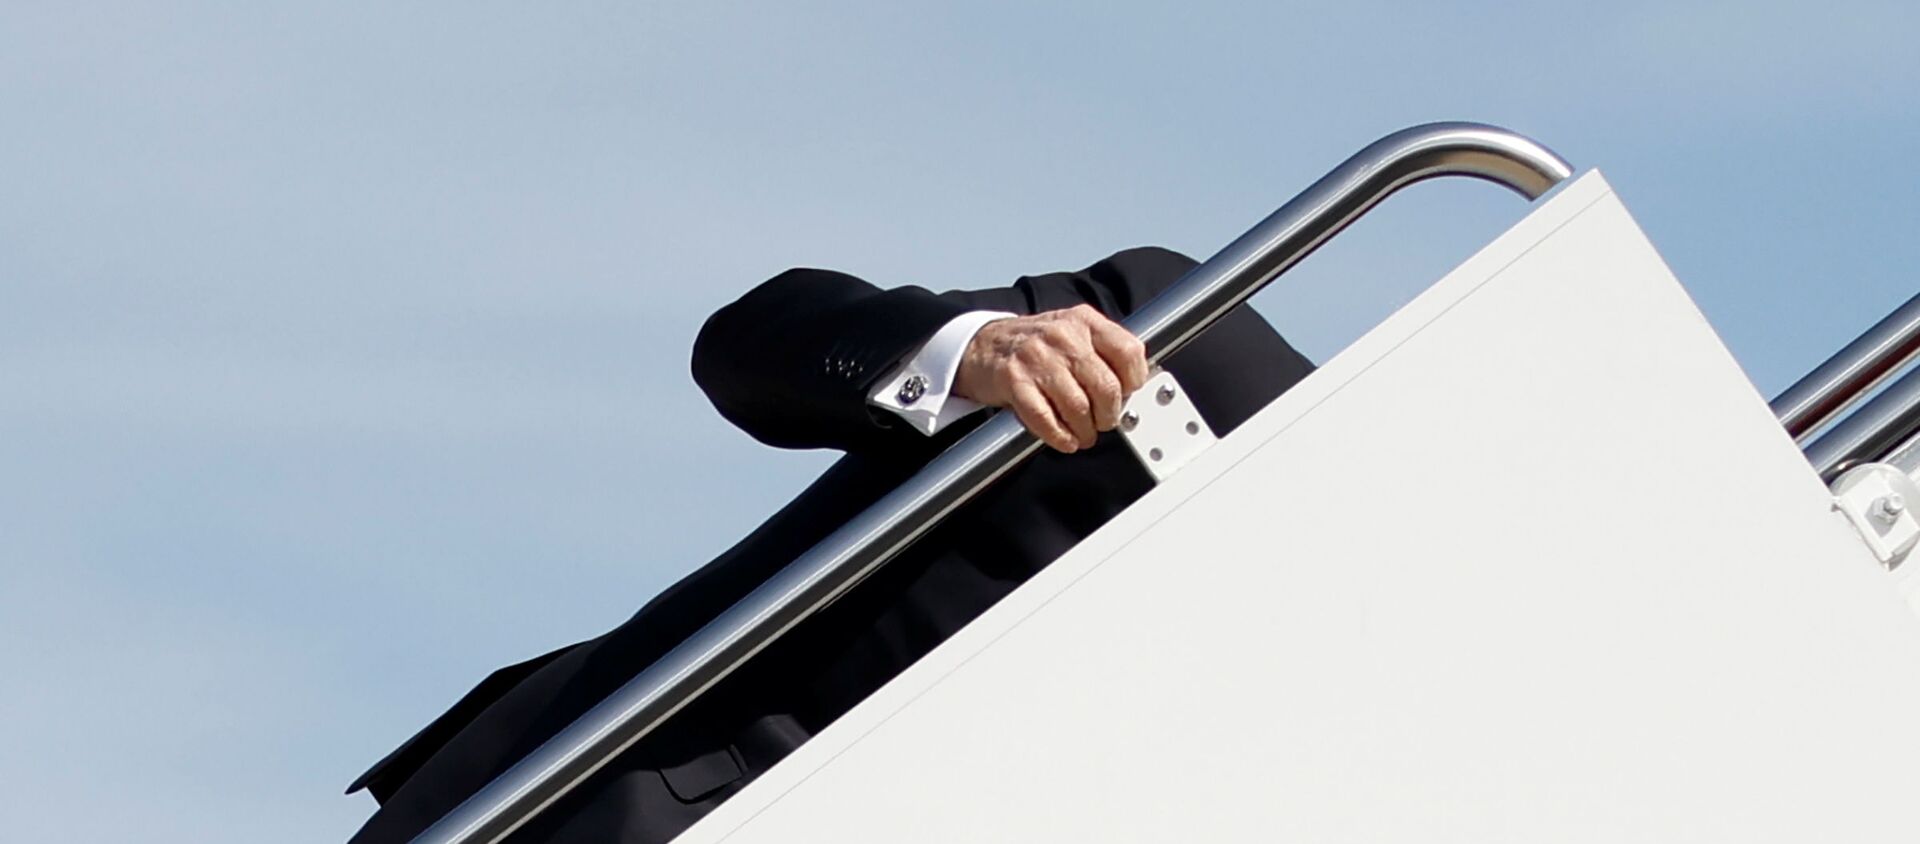 US President Joe Biden grabs onto the railing after he stumbled while boarding Air Force One as he departs Washington on travel to Atlanta, Georgia to promote the $1.9 trillion coronavirus disease (COVID-19) aid package known as the American Rescue Plan, at Joint Base Andrews, Maryland, US, March 19, 2021 - Sputnik International, 1920, 20.03.2021